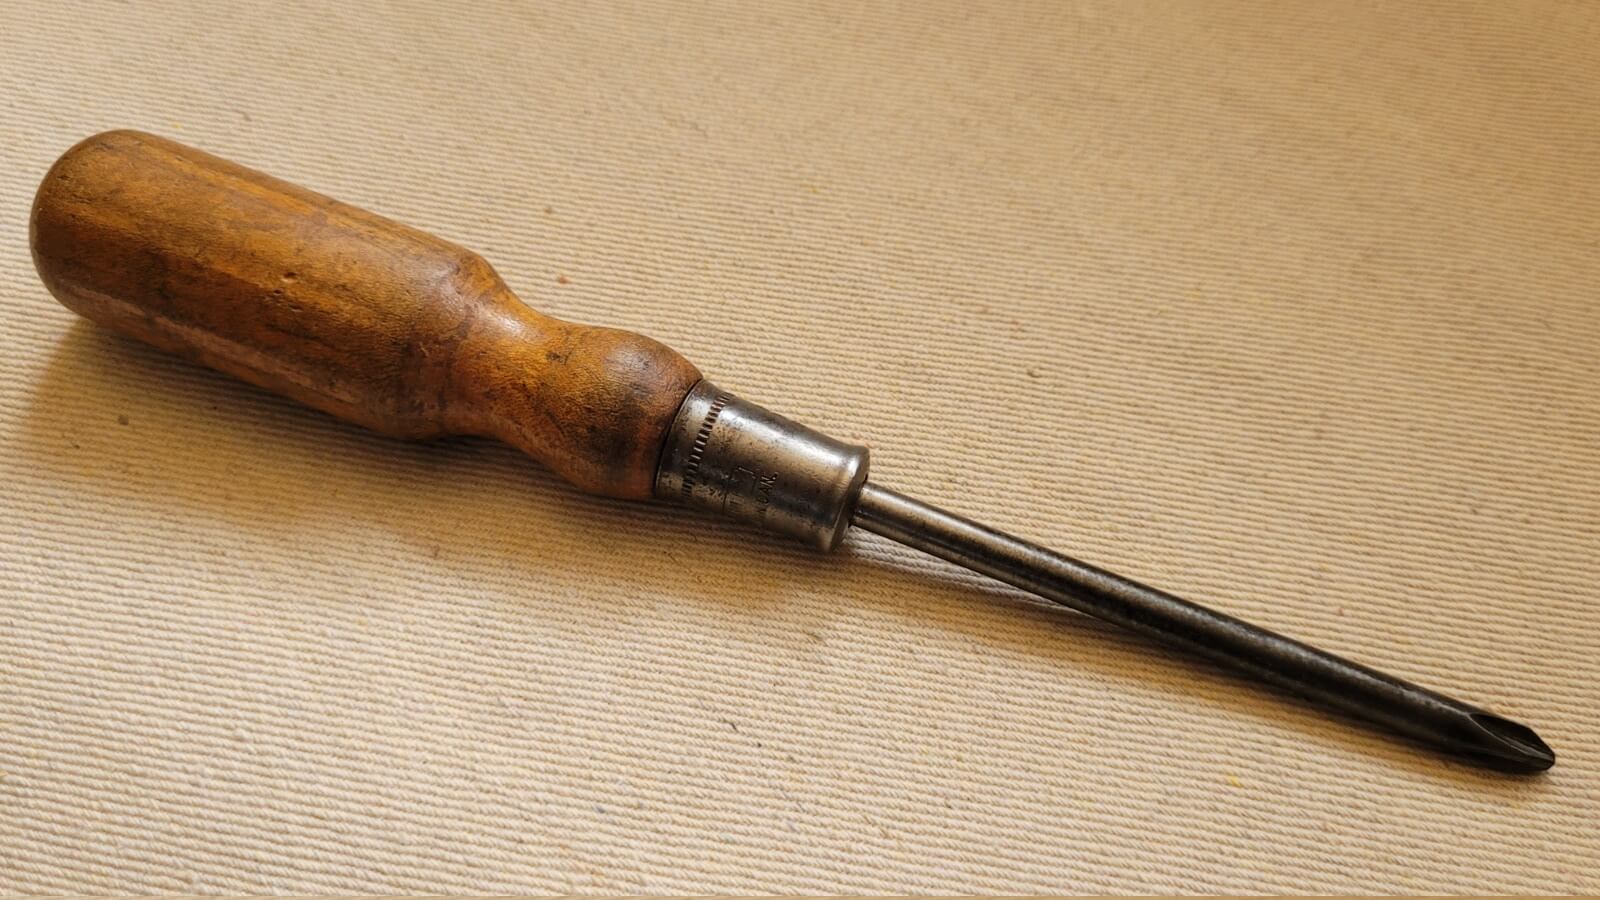 Antique Stanley Phillips Screwdriver Pat. 363264 w Wooden Handle - Made in Canada Vintage Tool Collectibles